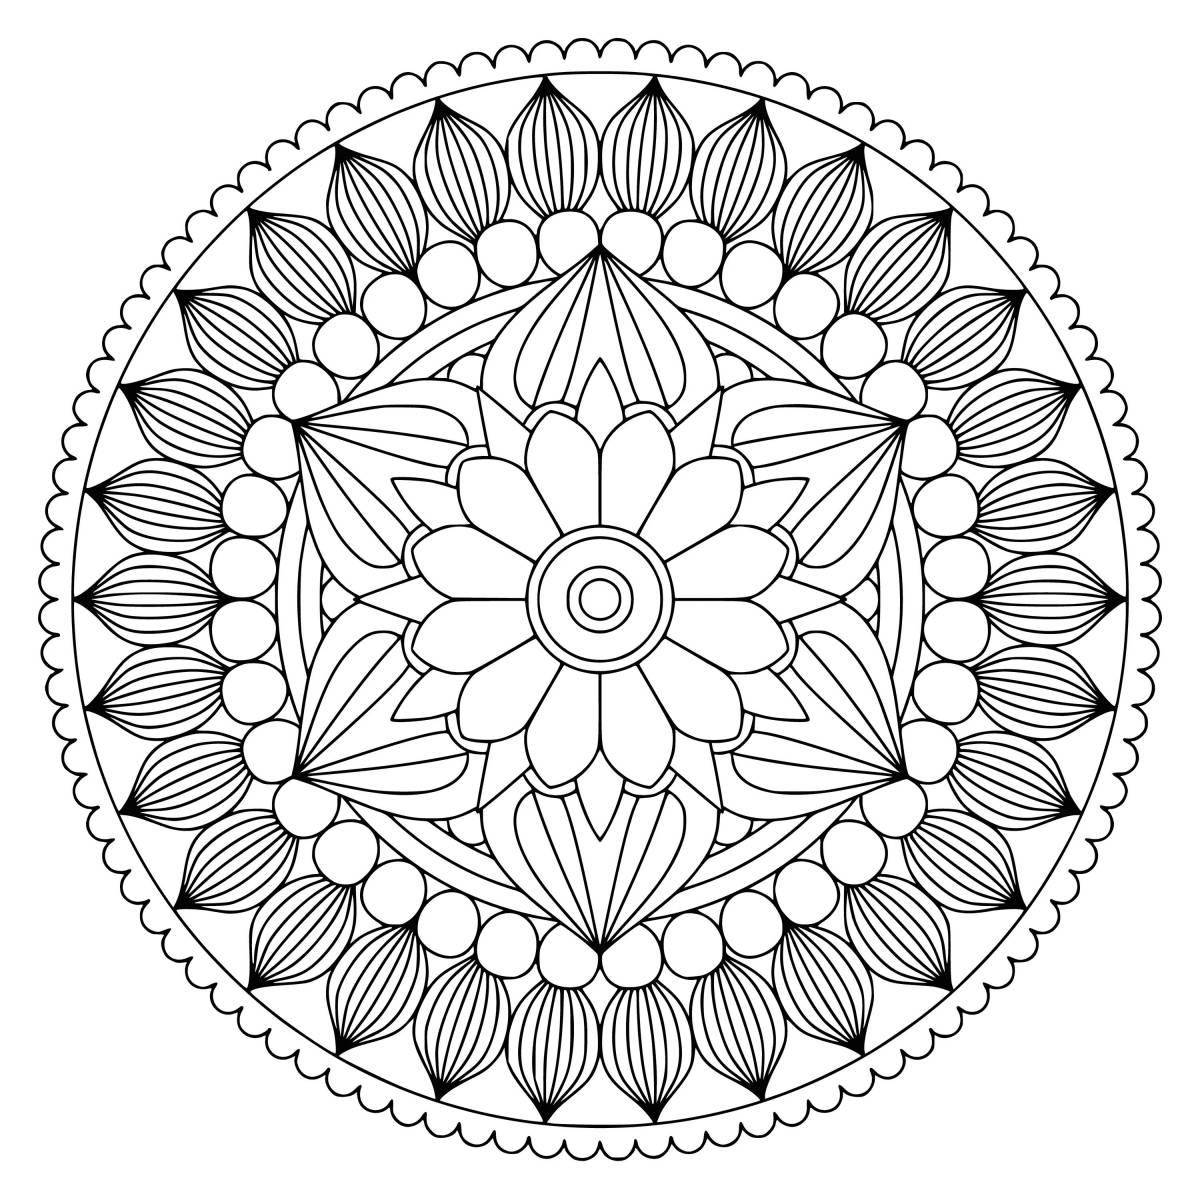 Refreshing coloring mandala of peace and tranquility